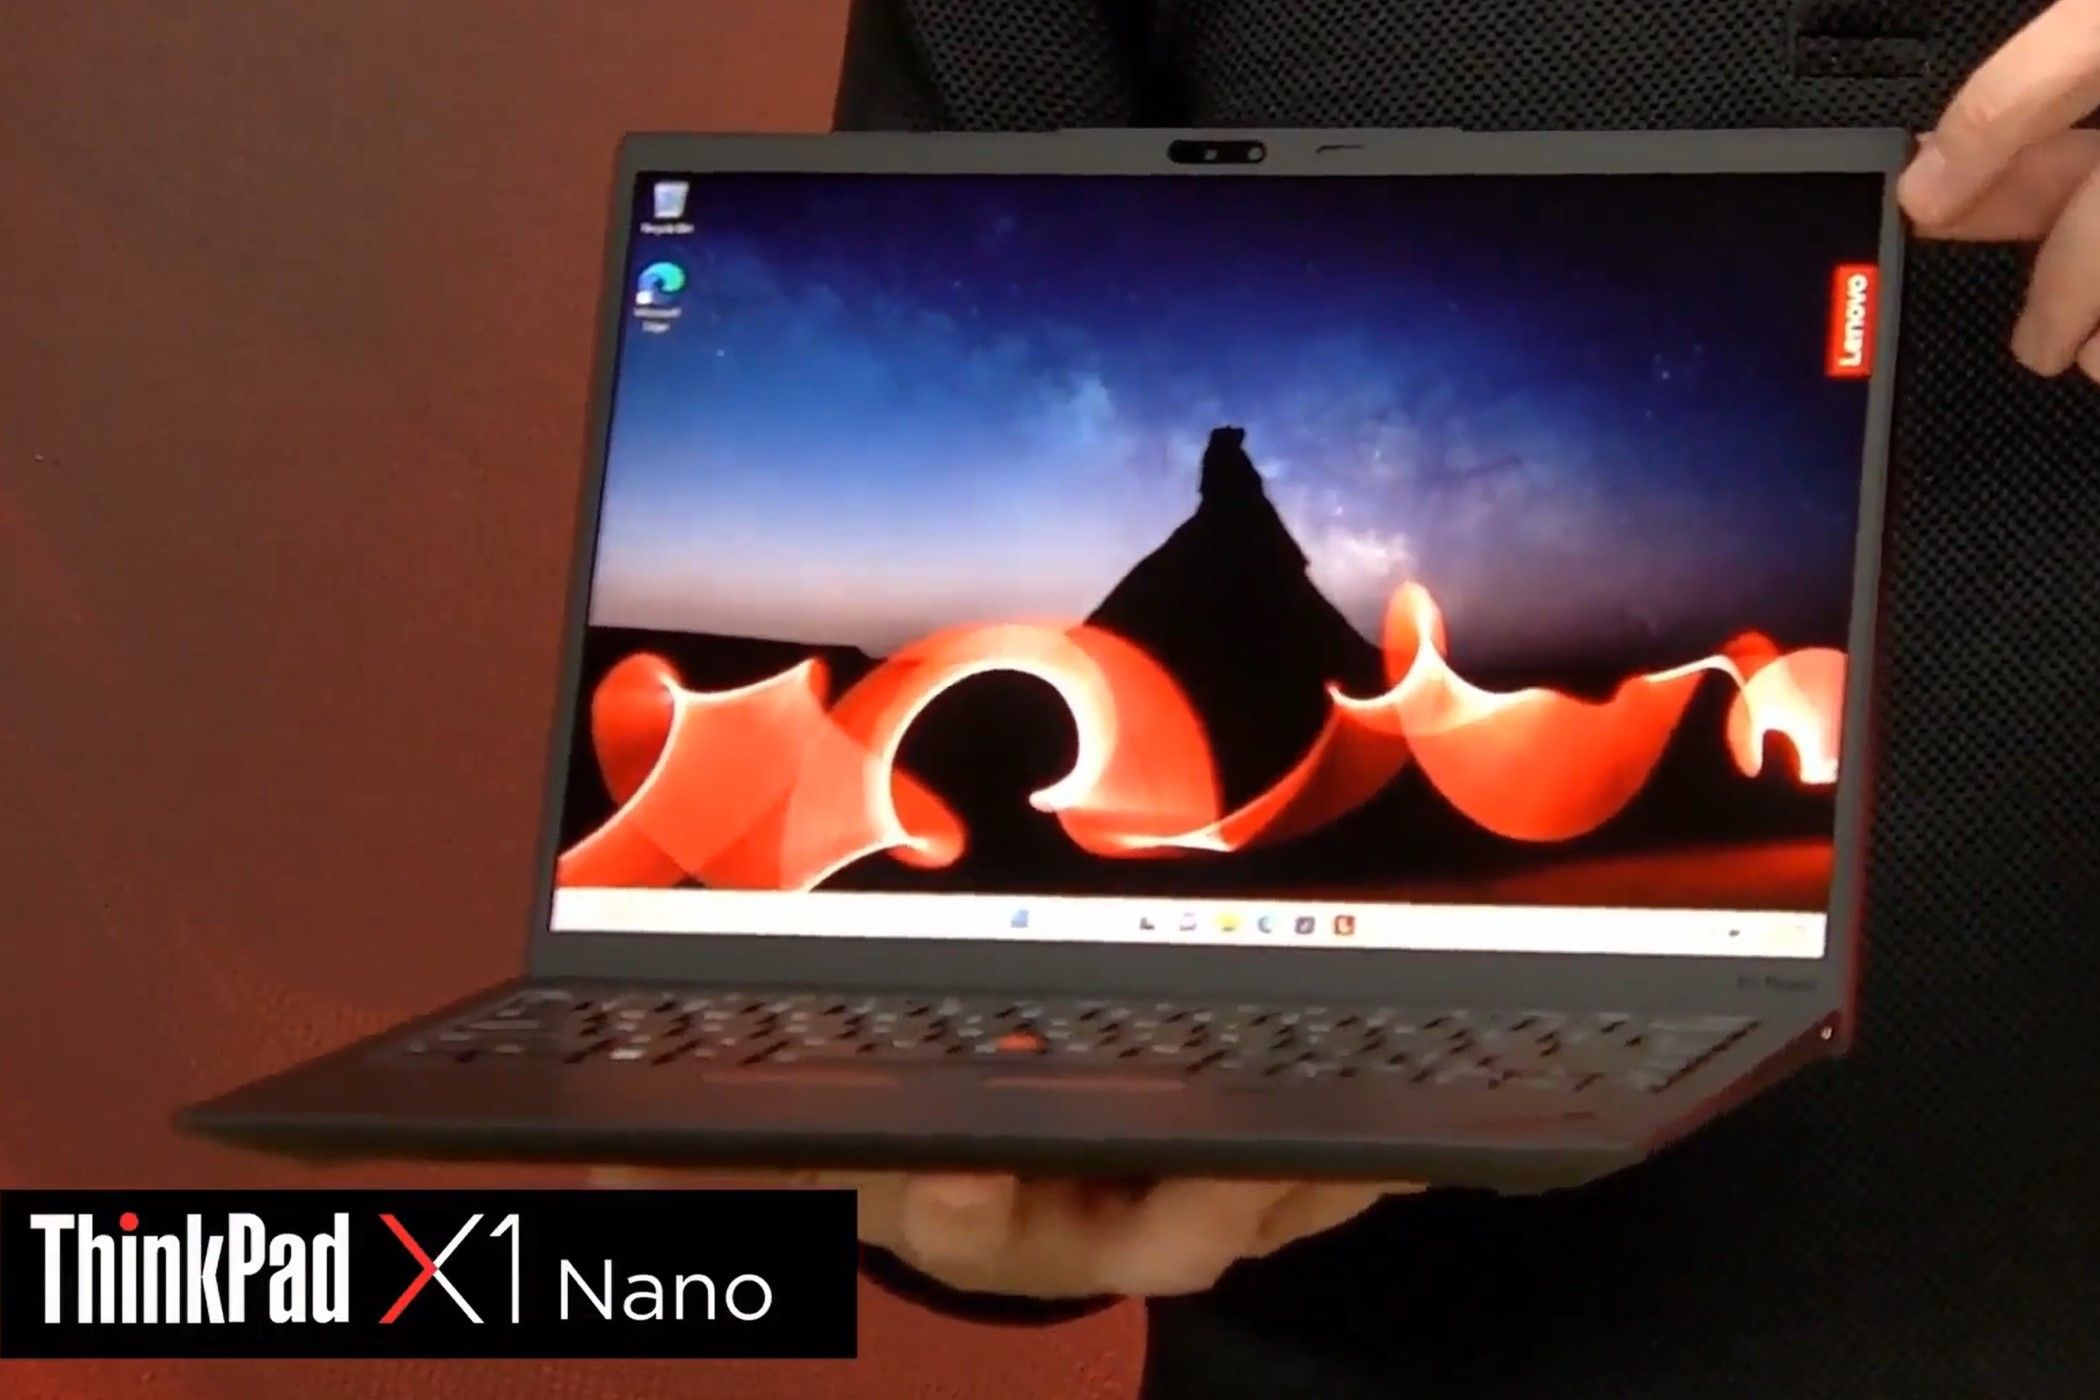 Lenovo ThinkPad X1 Nano Gen 3: Price, release date, and everything else